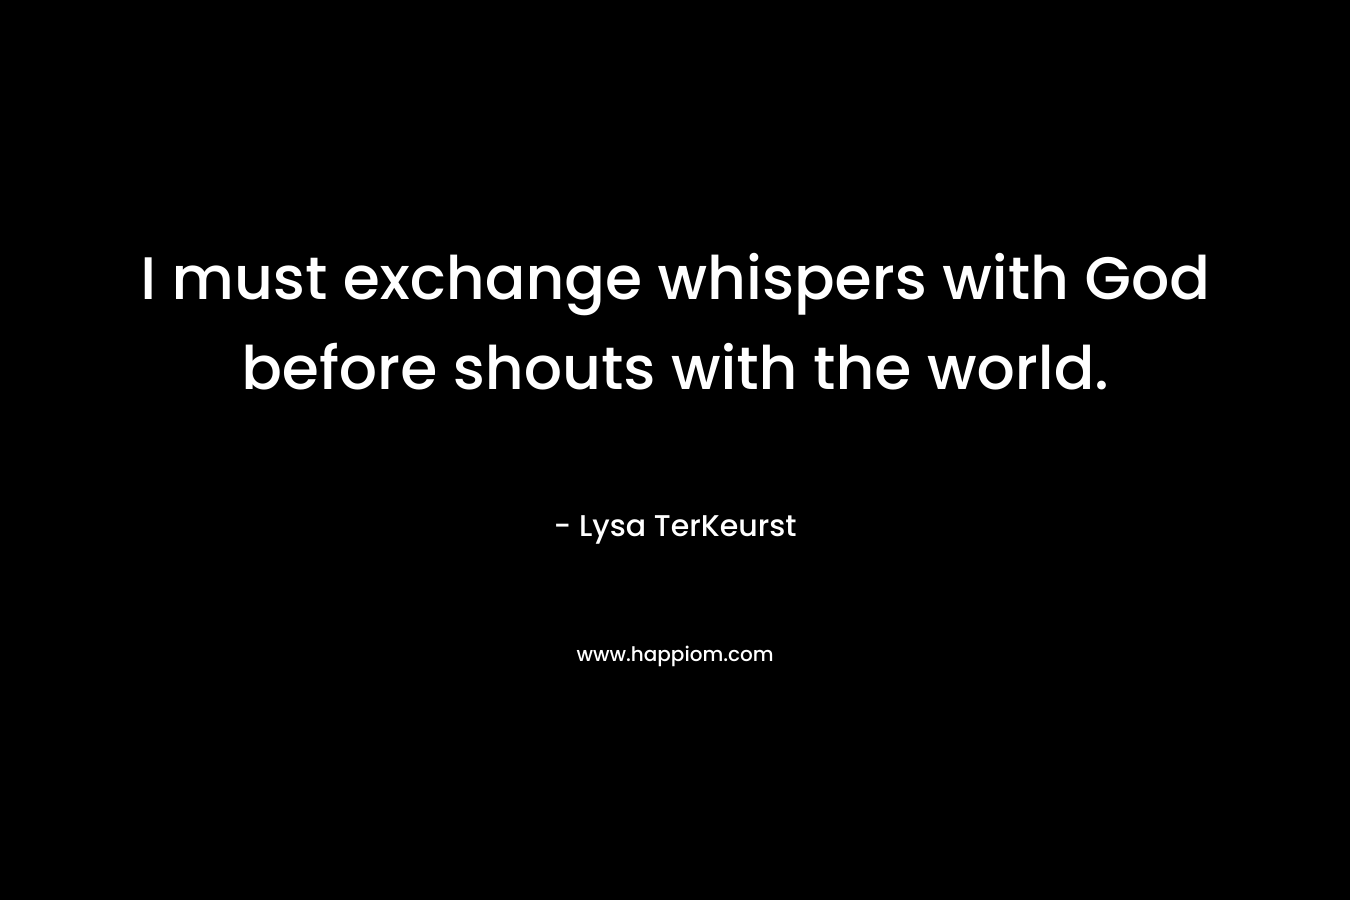 I must exchange whispers with God before shouts with the world.